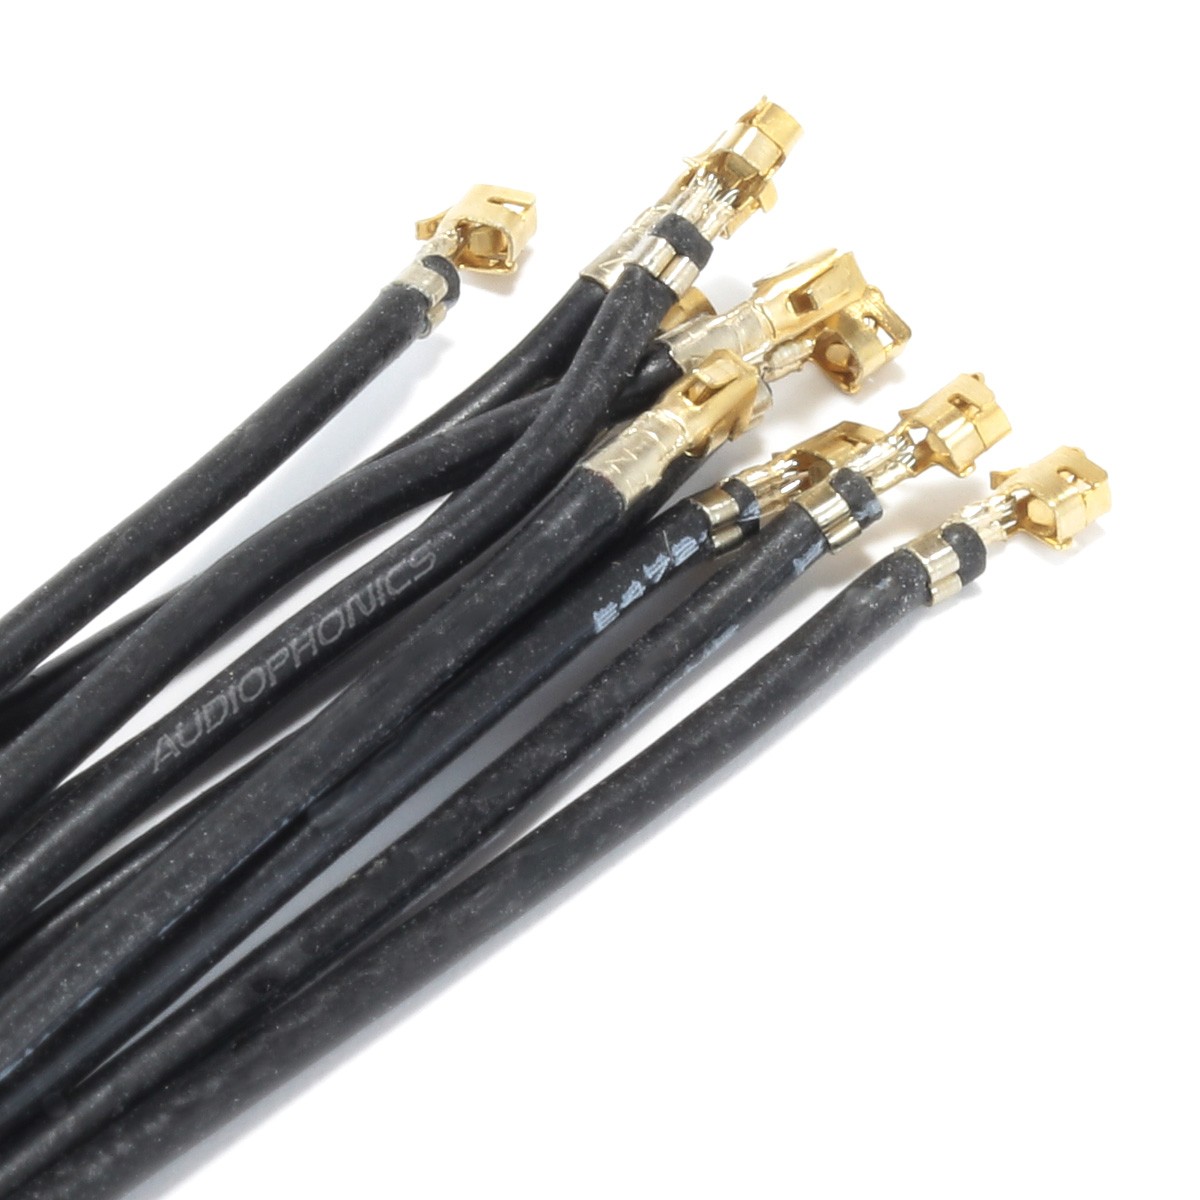 XH 2.54mm Female / Female Cable 1 Pole No Casing Gold Plated Silicone Black 30cm (x10)